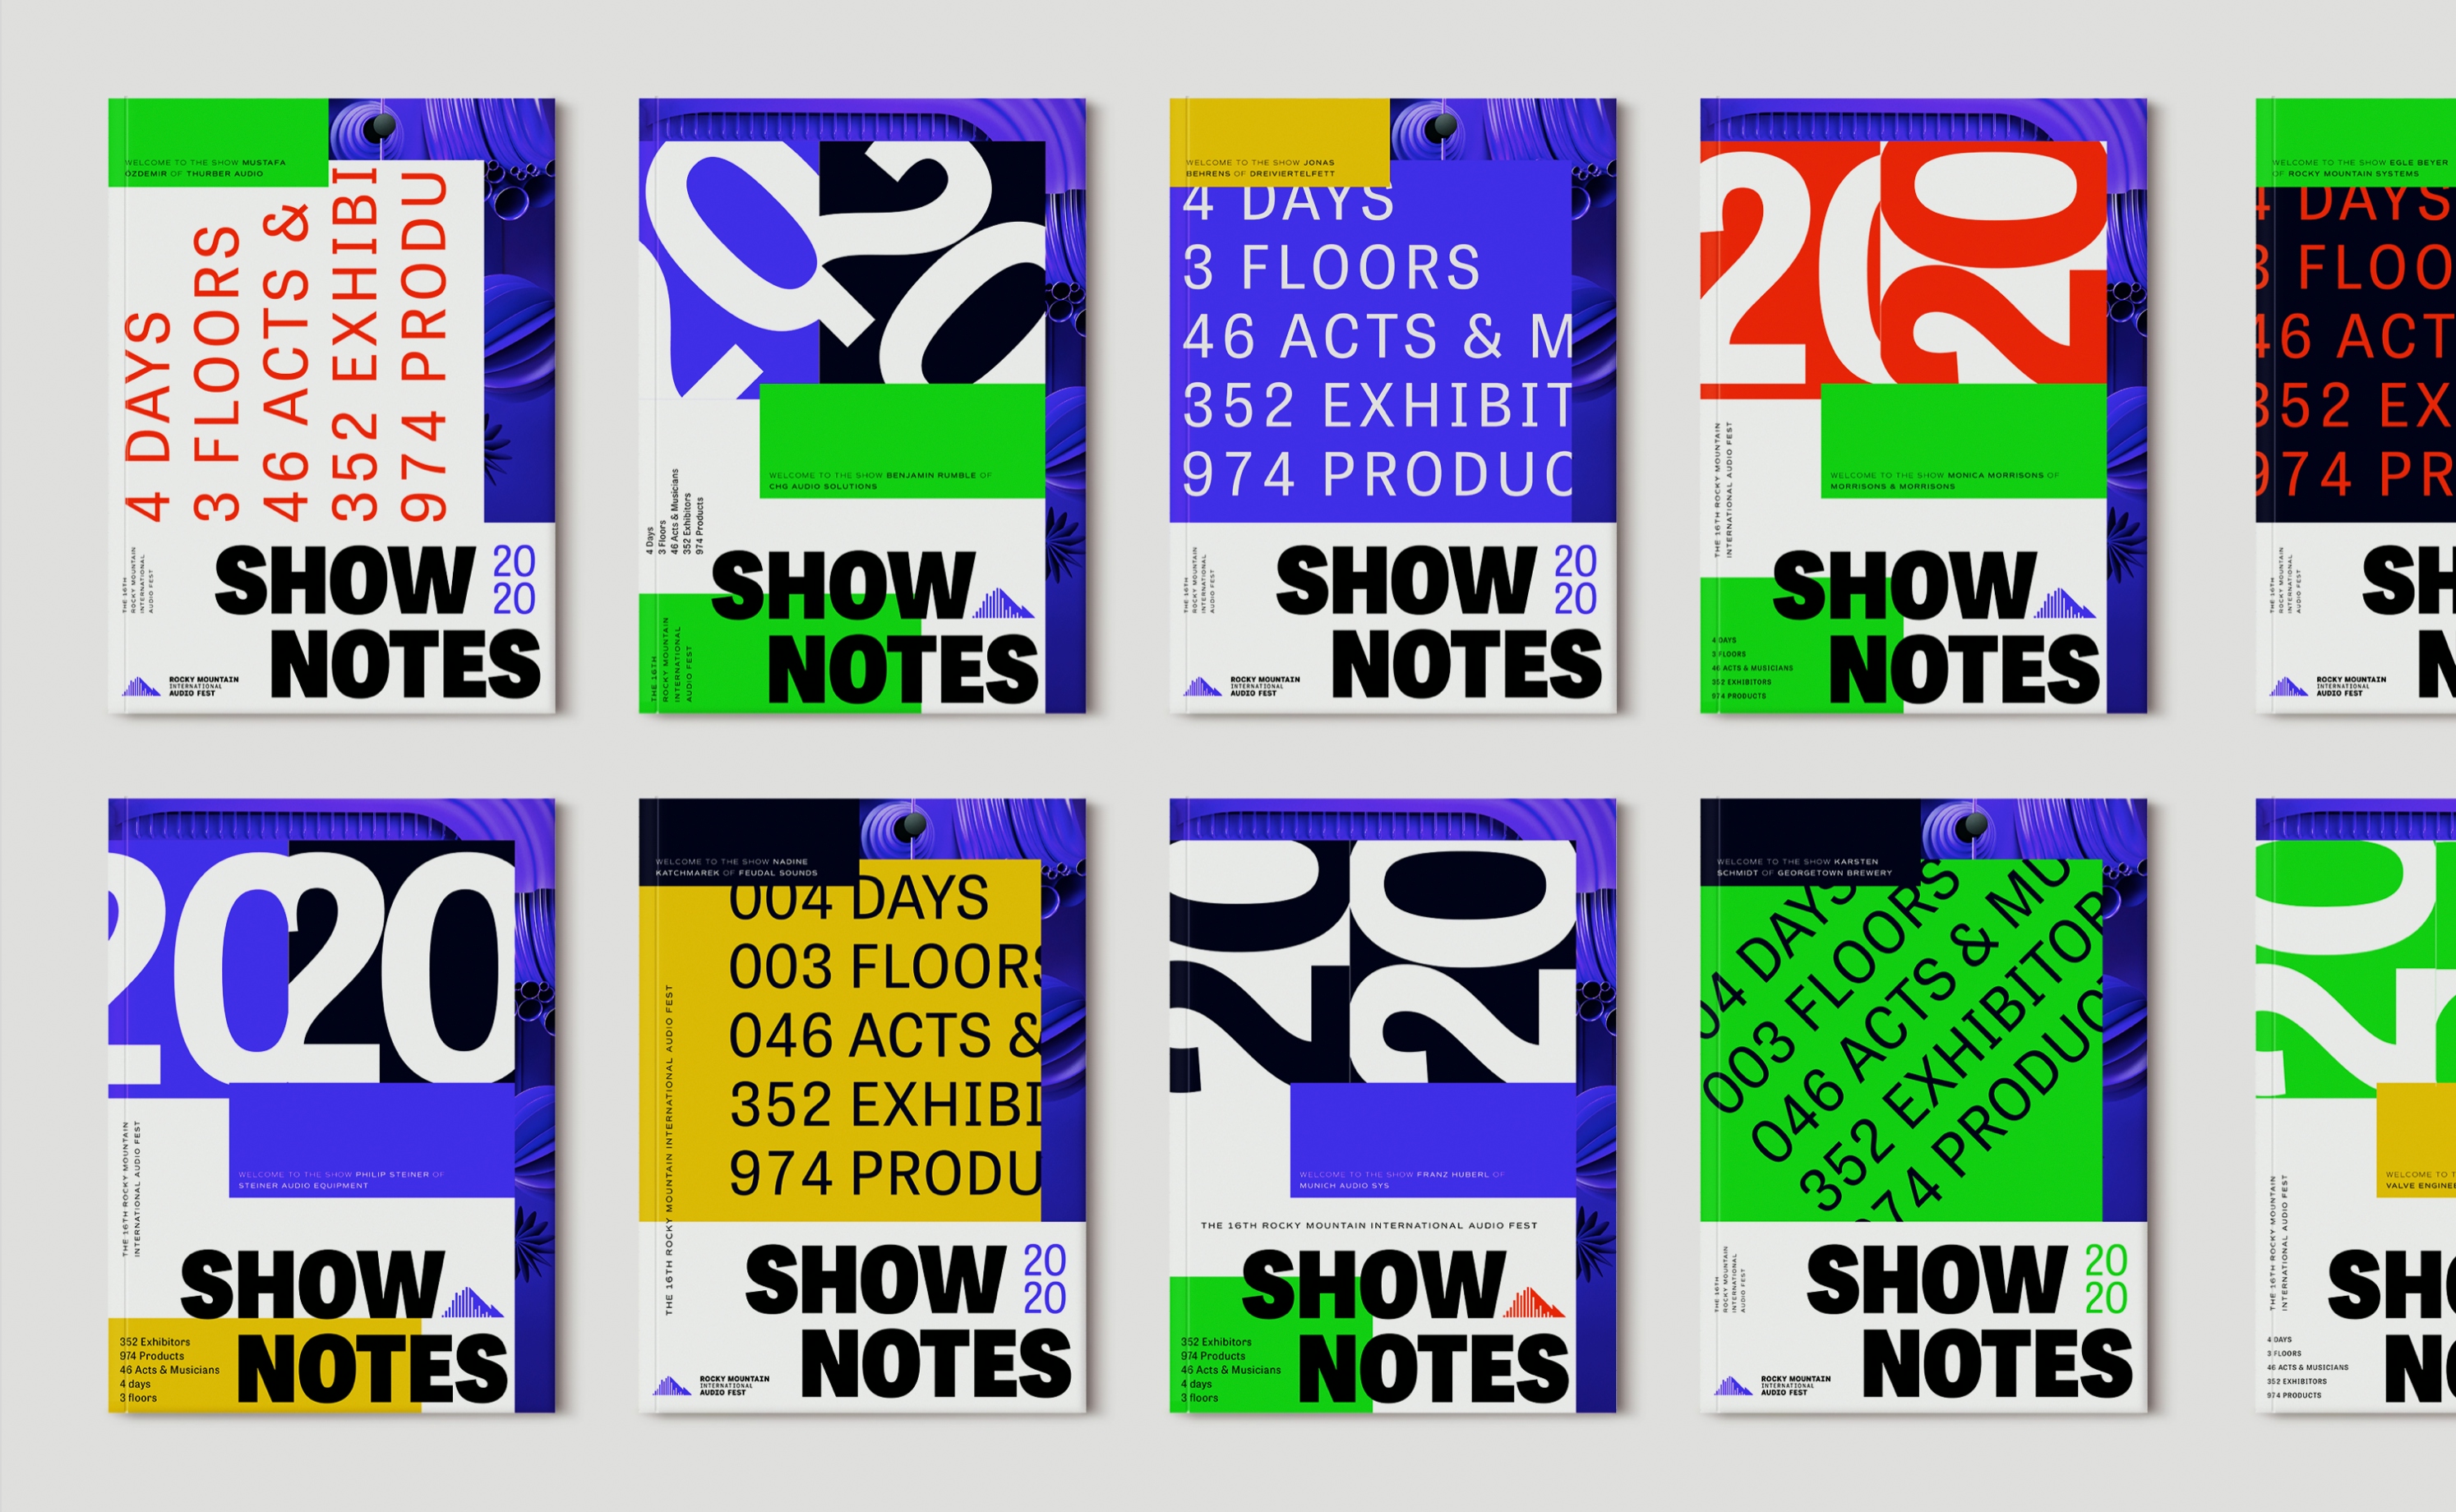 10 different shownotes covers. Some say 2020 shownotes and some say The festival is staged over three floors, across four days, has 46 musicians, 352 exhibitors and showcases 974 products